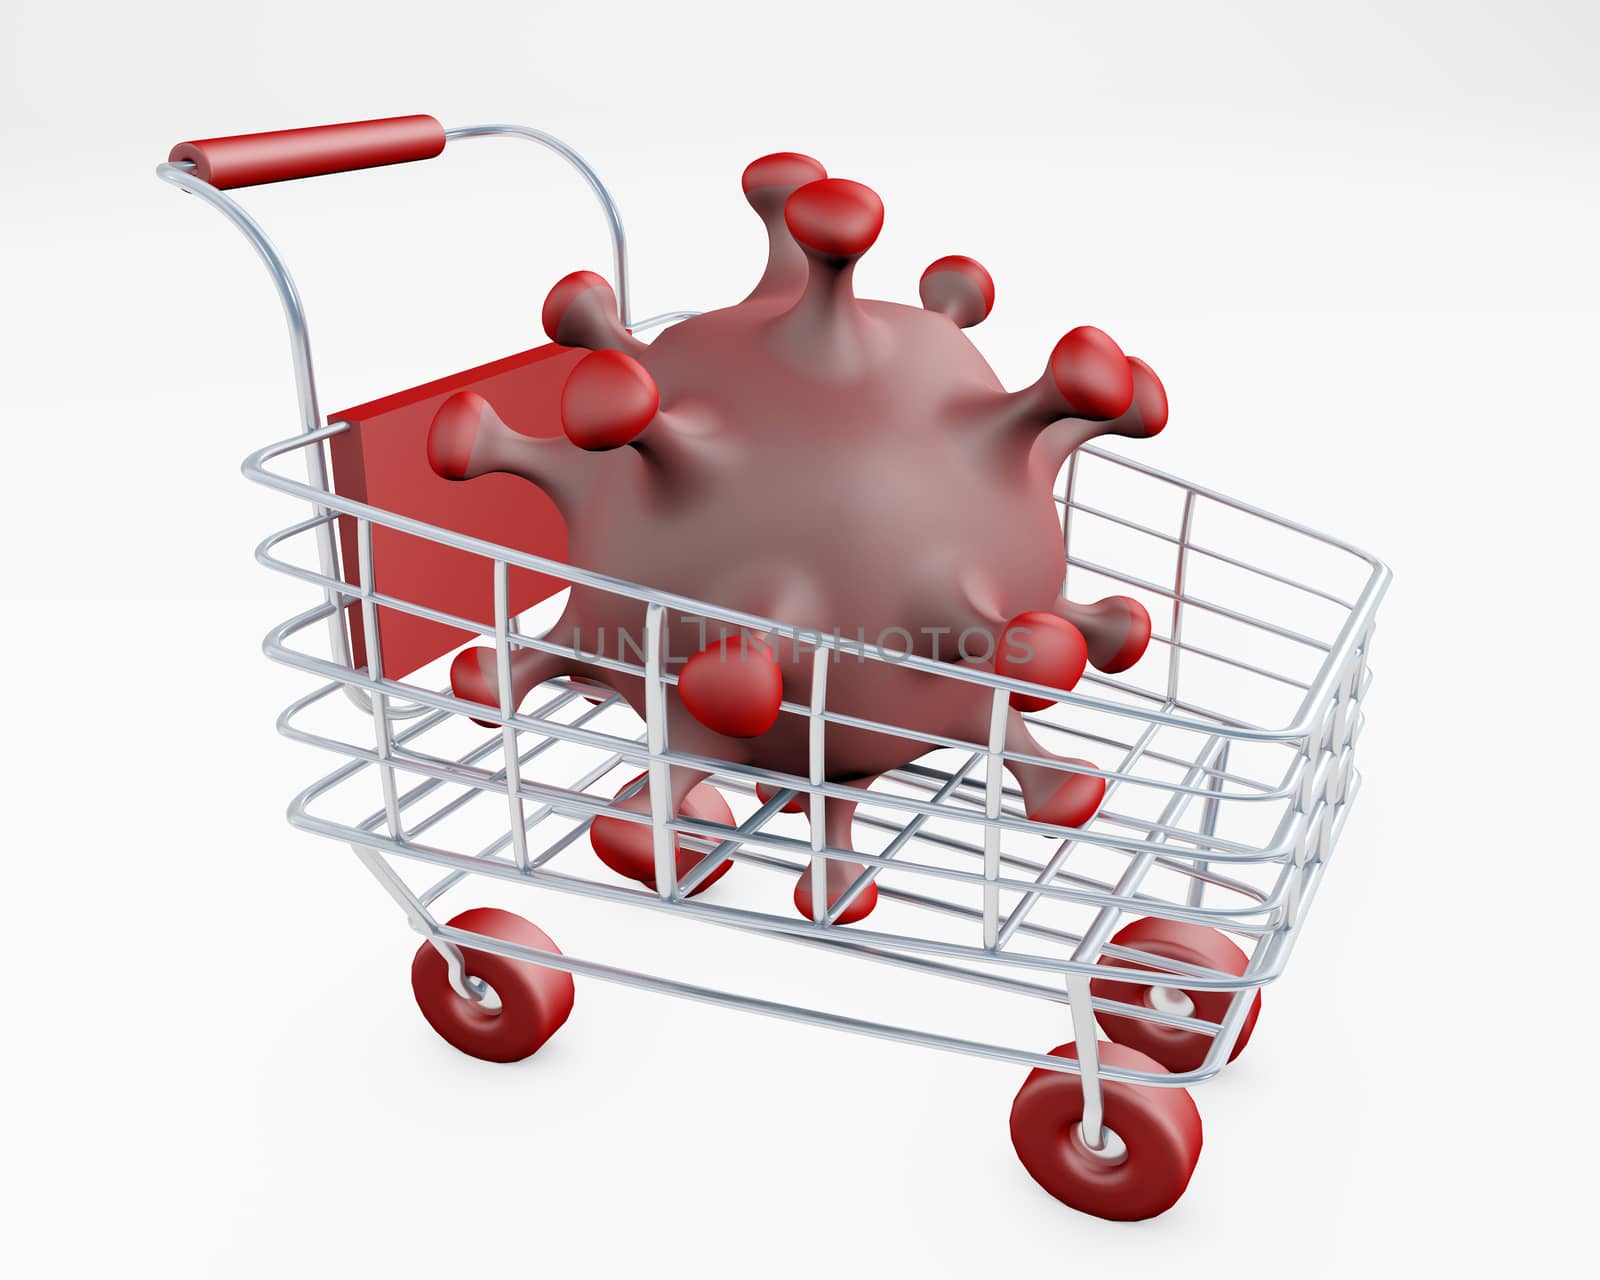 Shopping cart contageous with corona virus 3d rendering by F1b0nacci